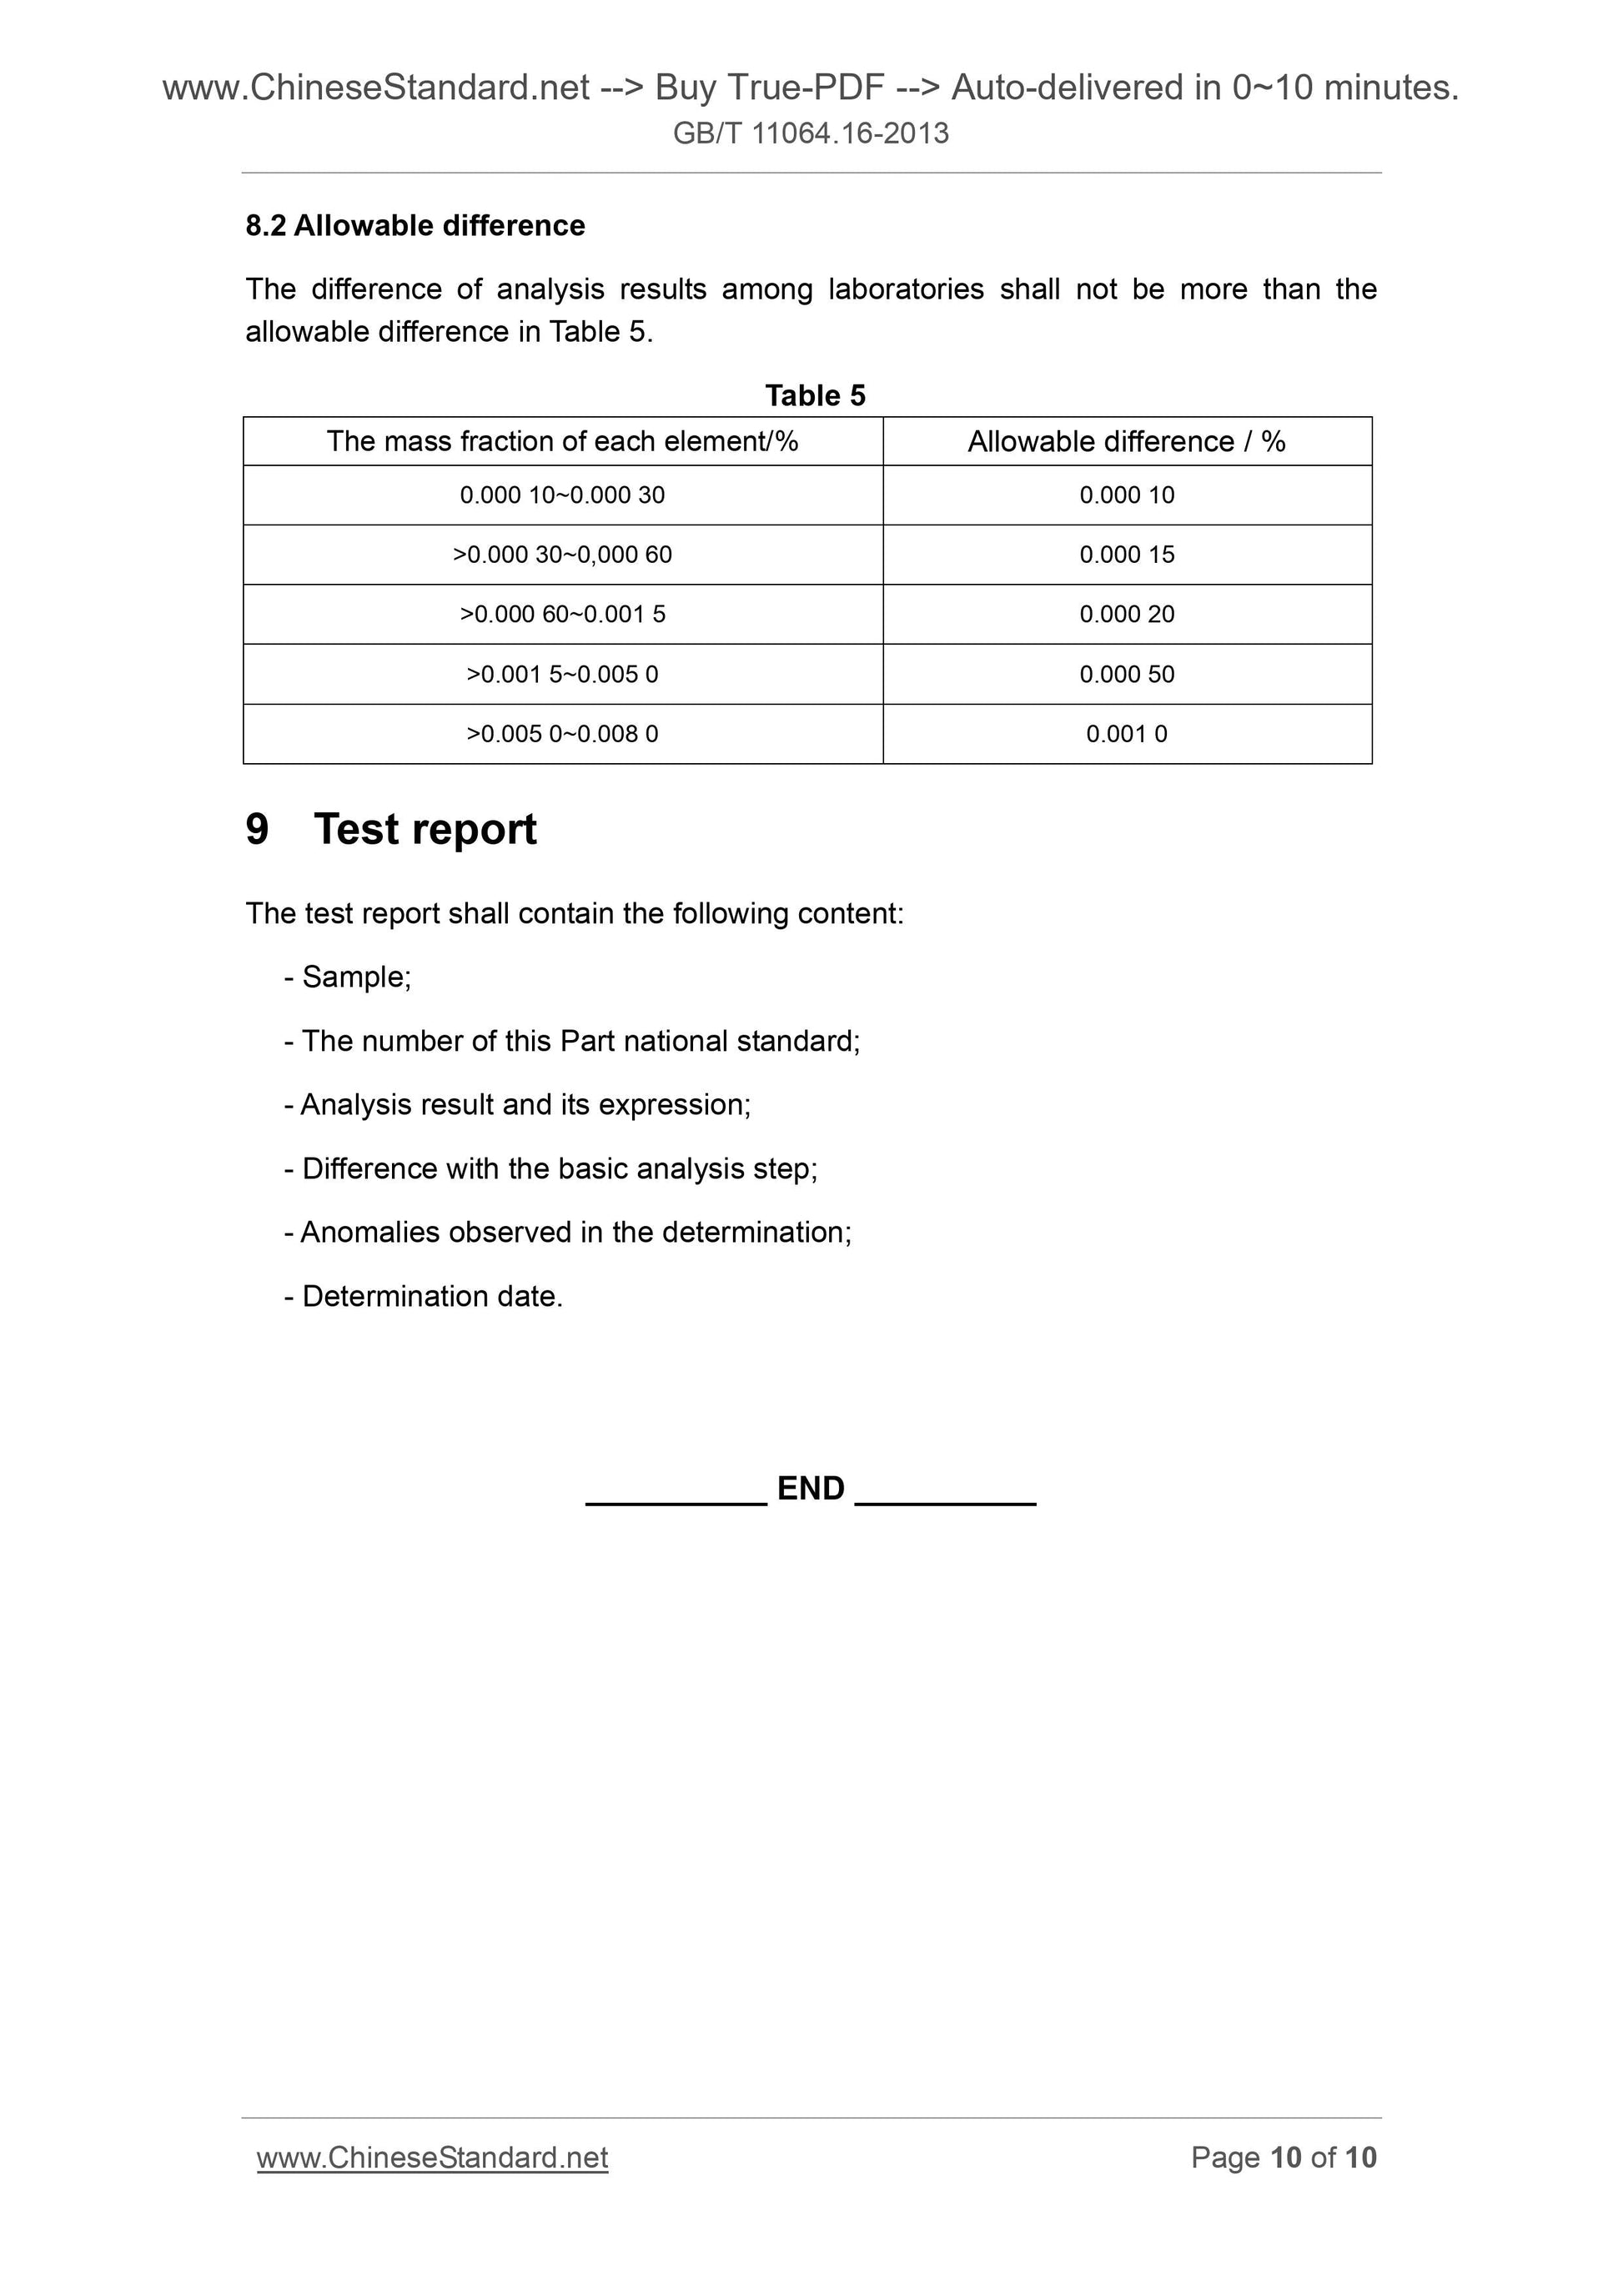 GB/T 11064.16-2013 Page 7